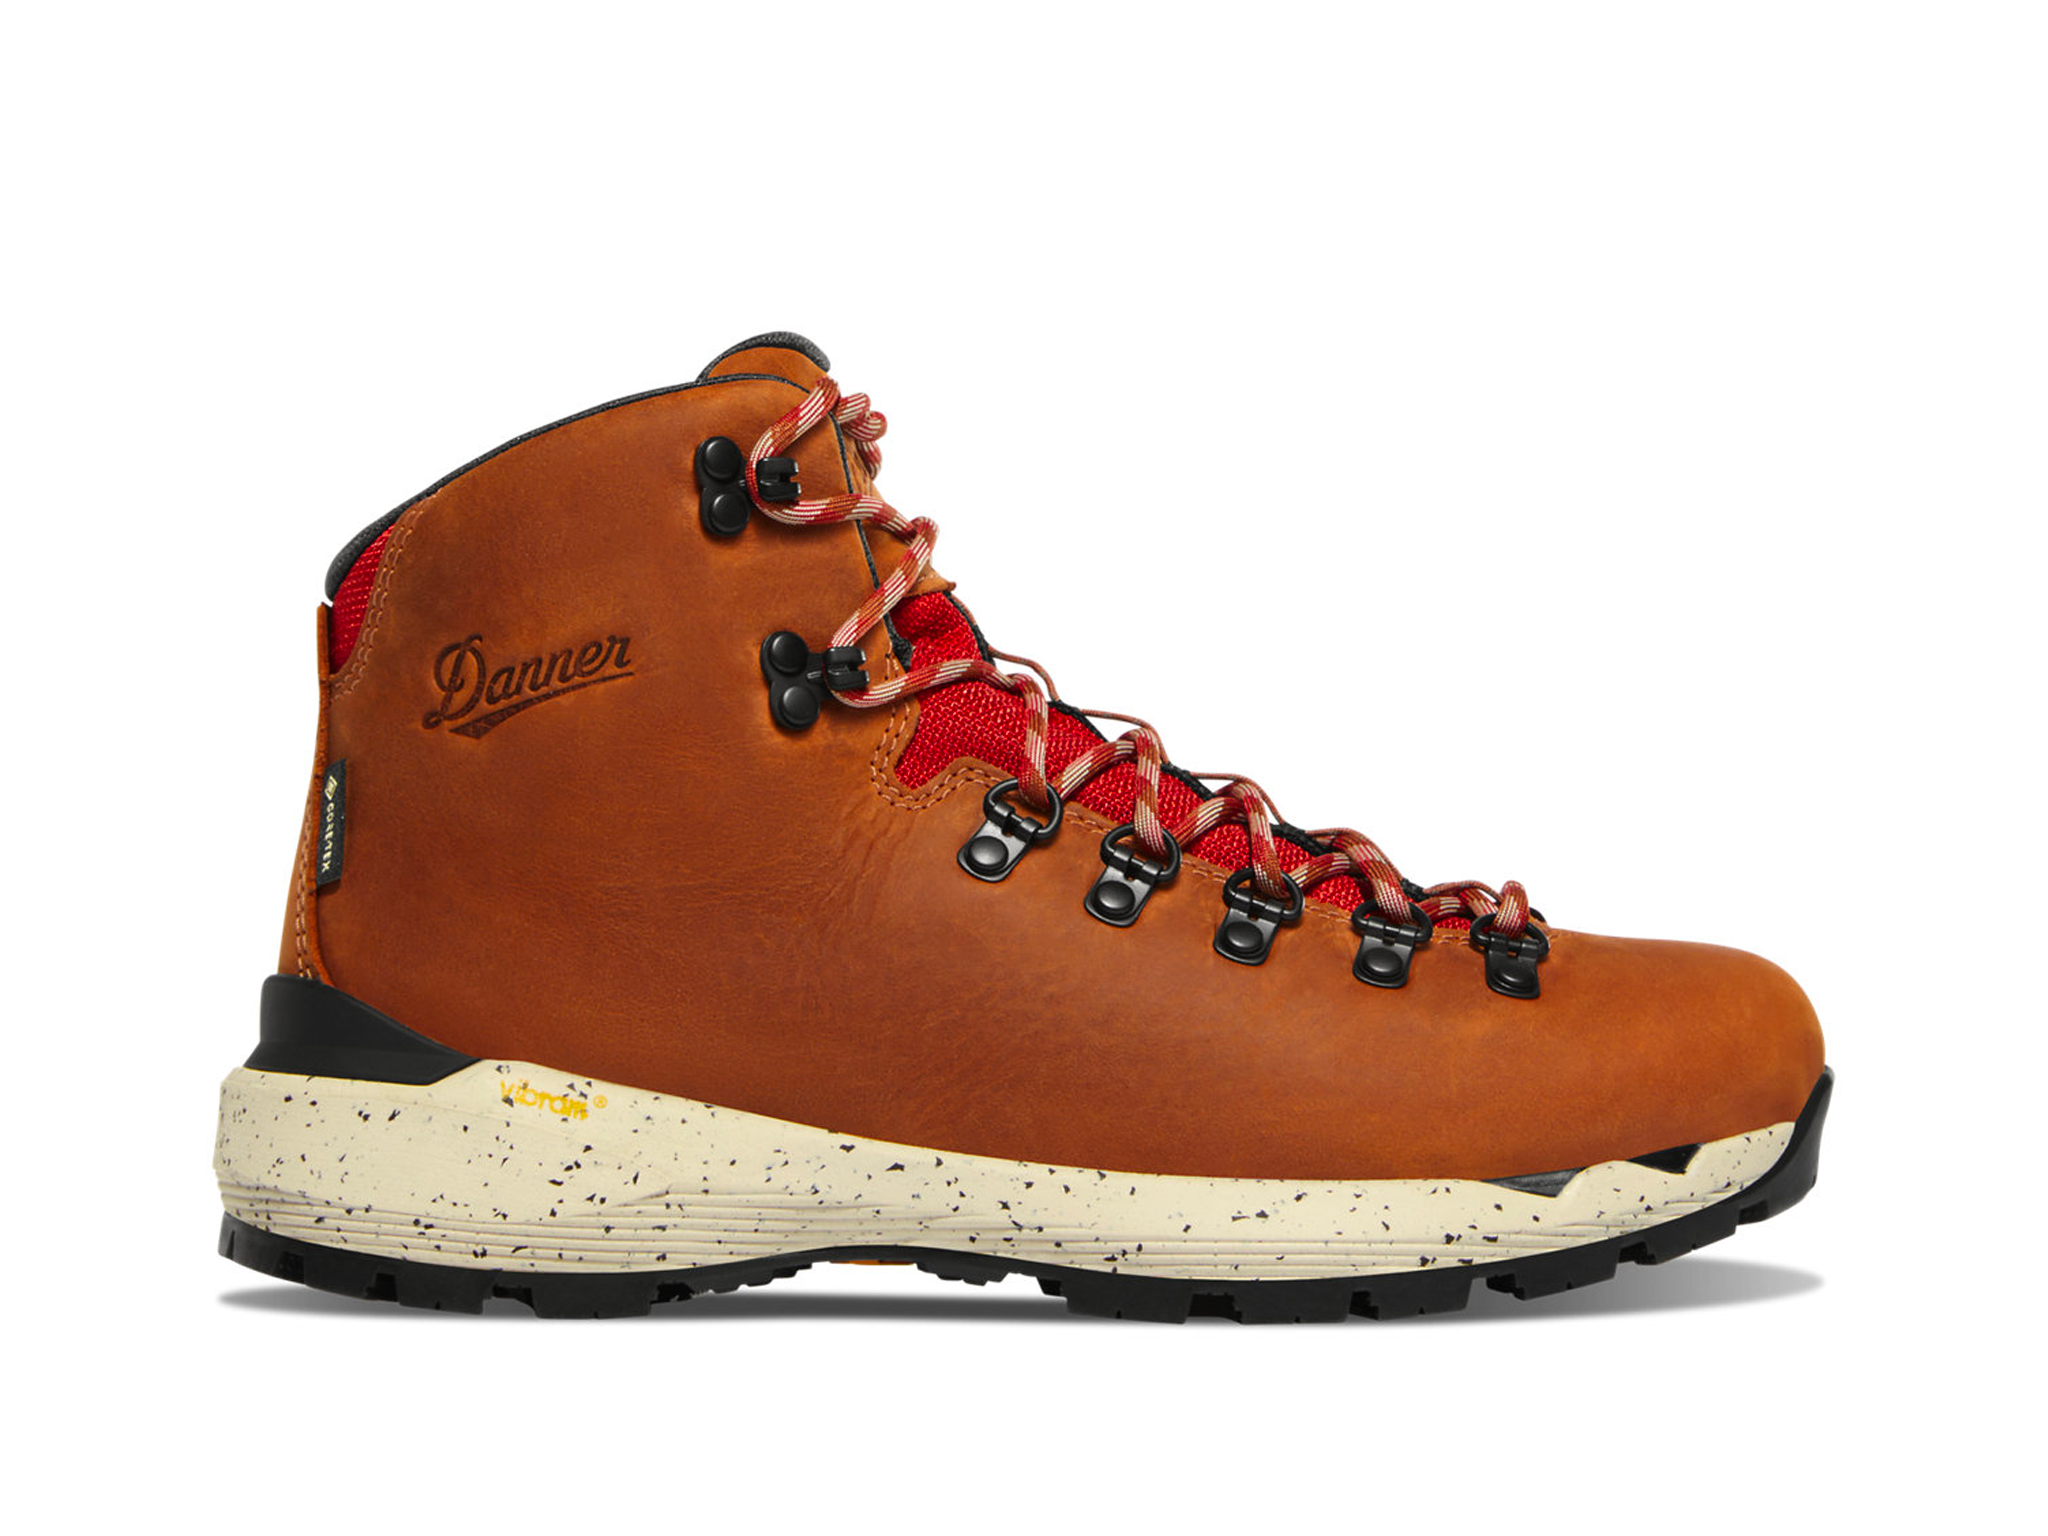 Danner-hiking-boots-indybest